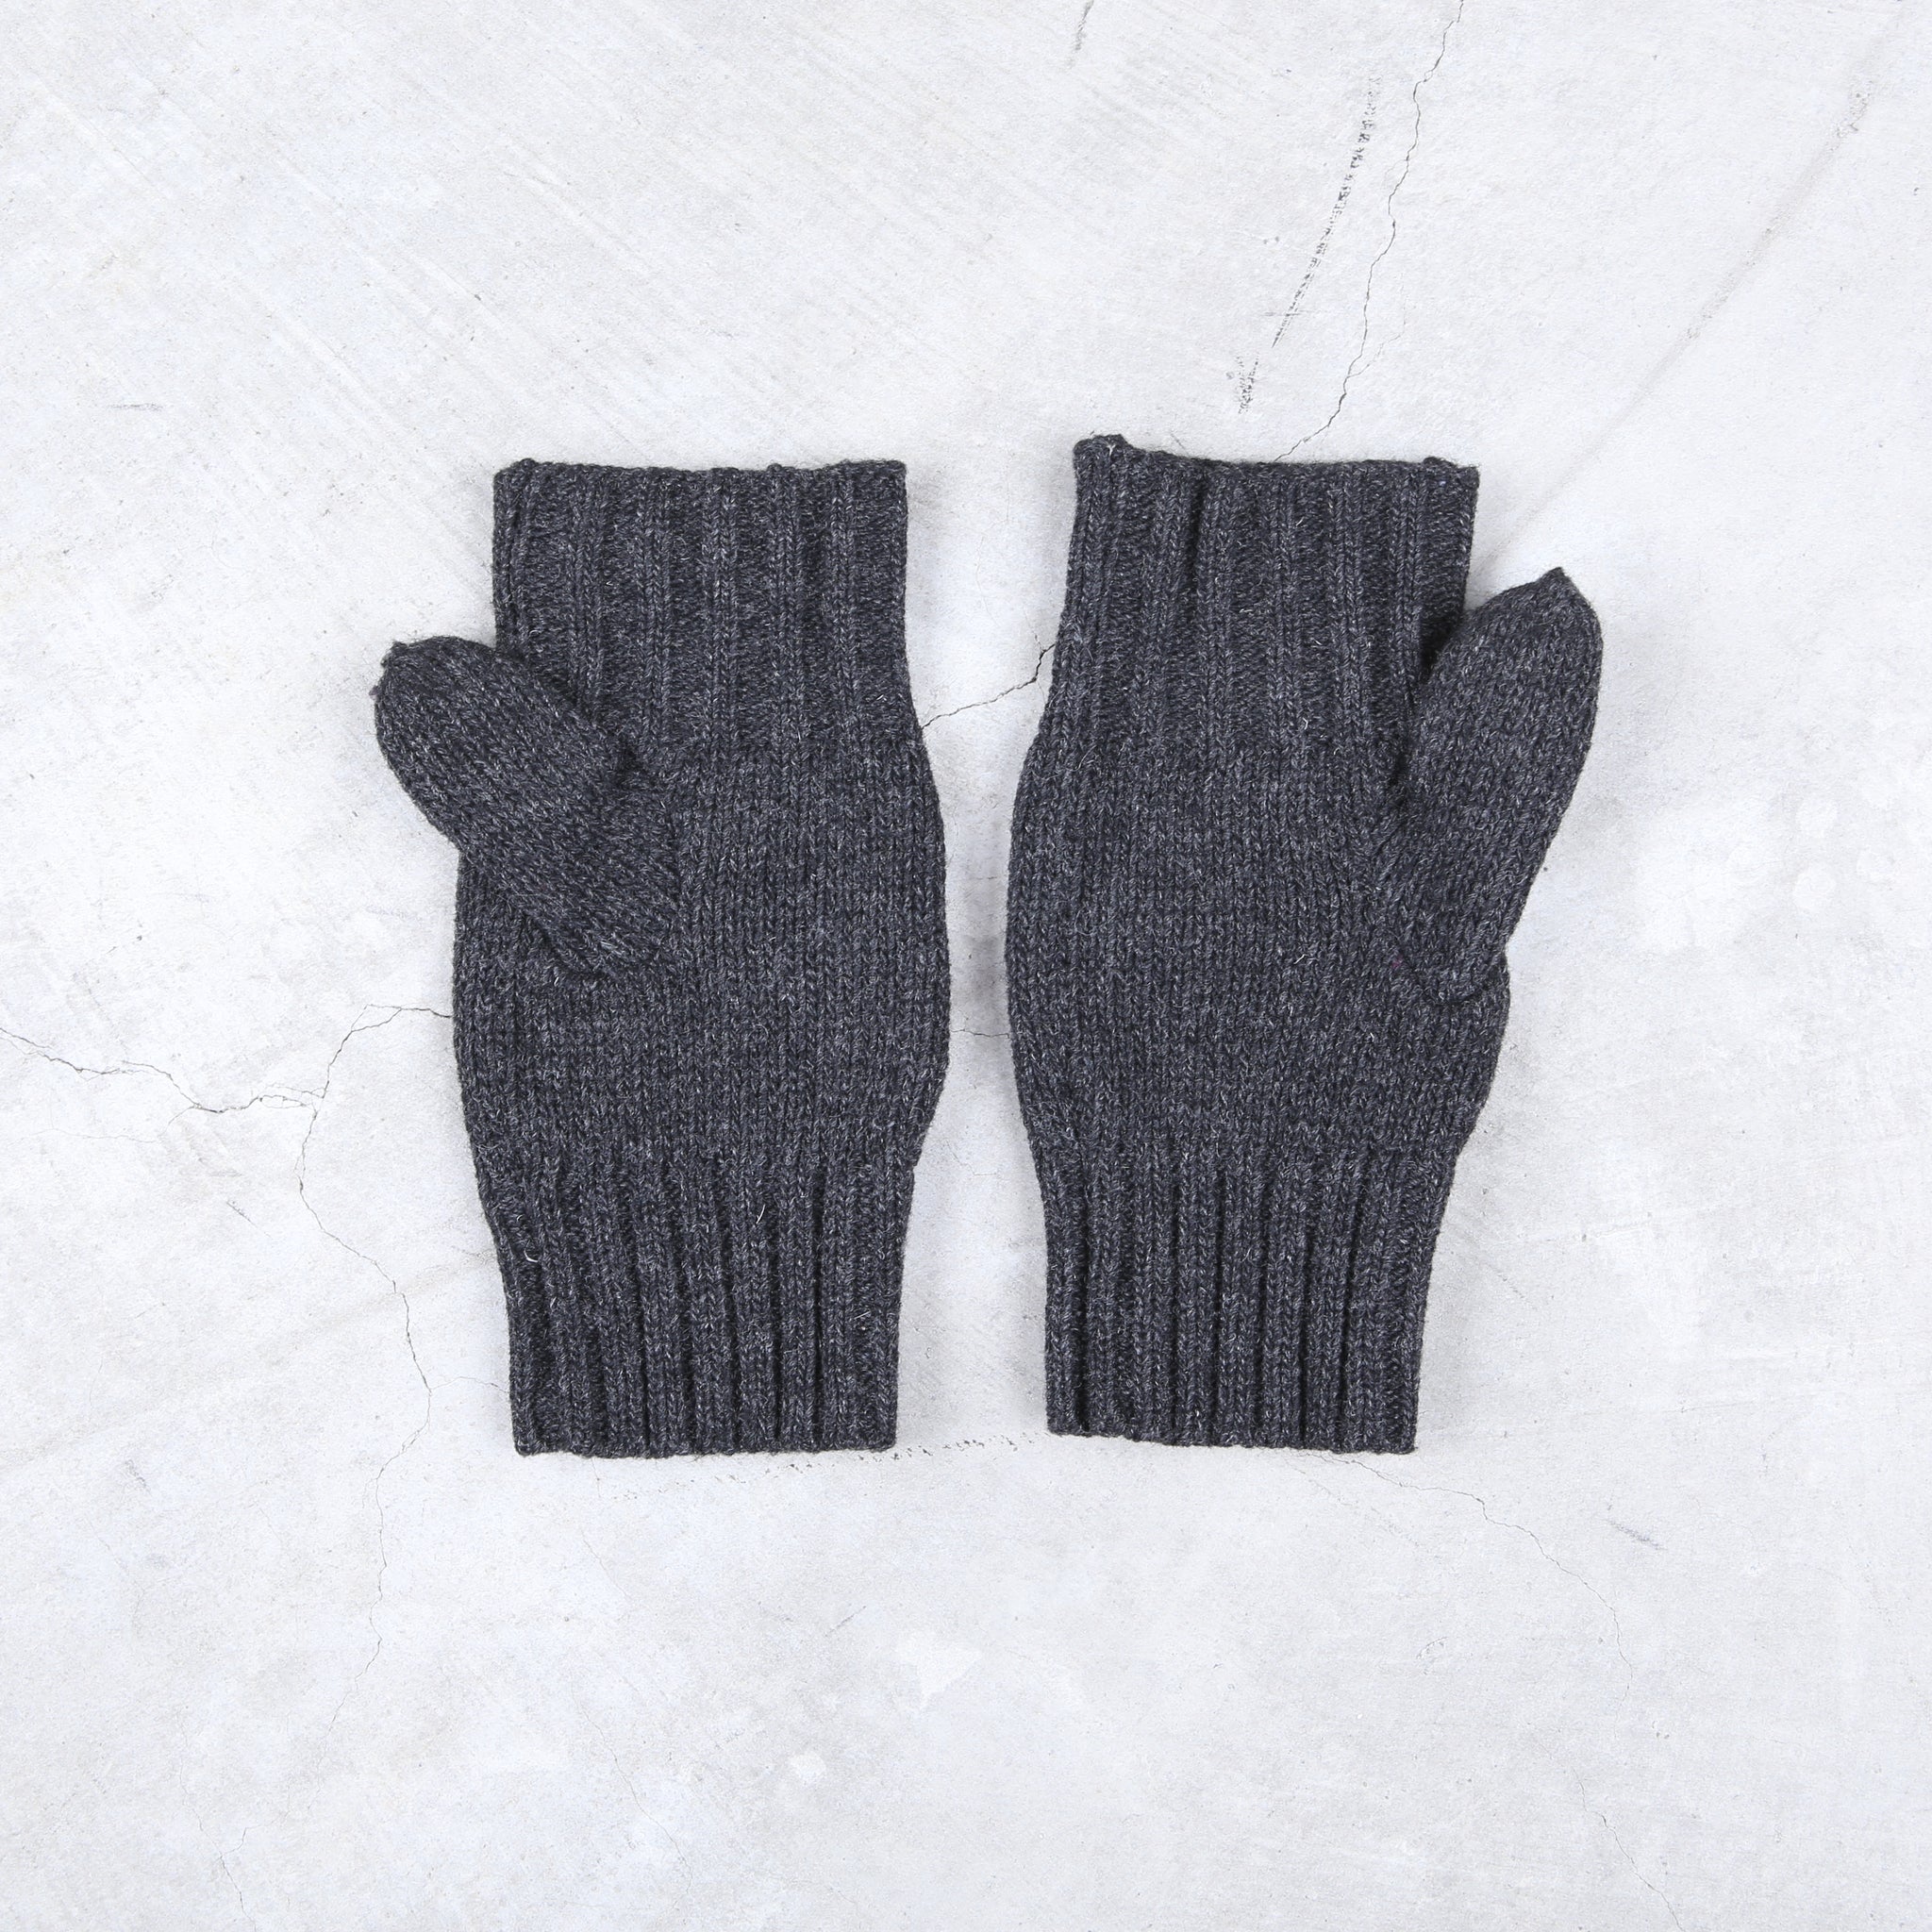 Carol Christian Poell Fall/07-08 “Disjointed” Wool Gloves